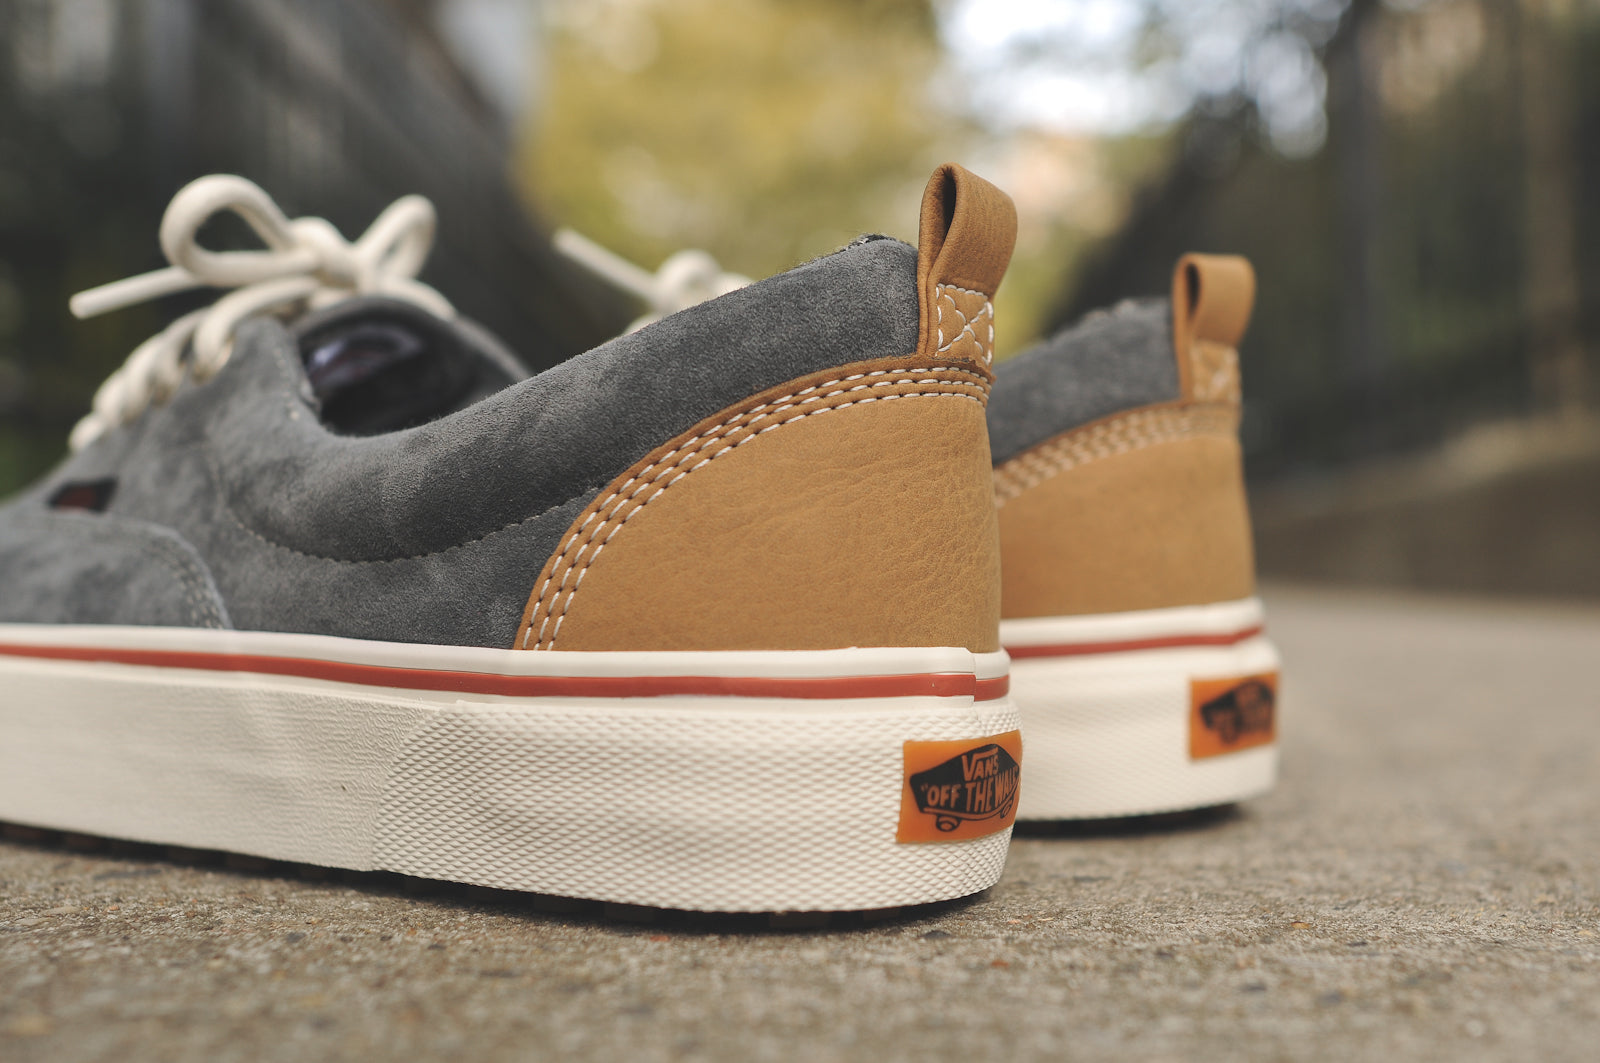 Vans Releases New MTE Collection